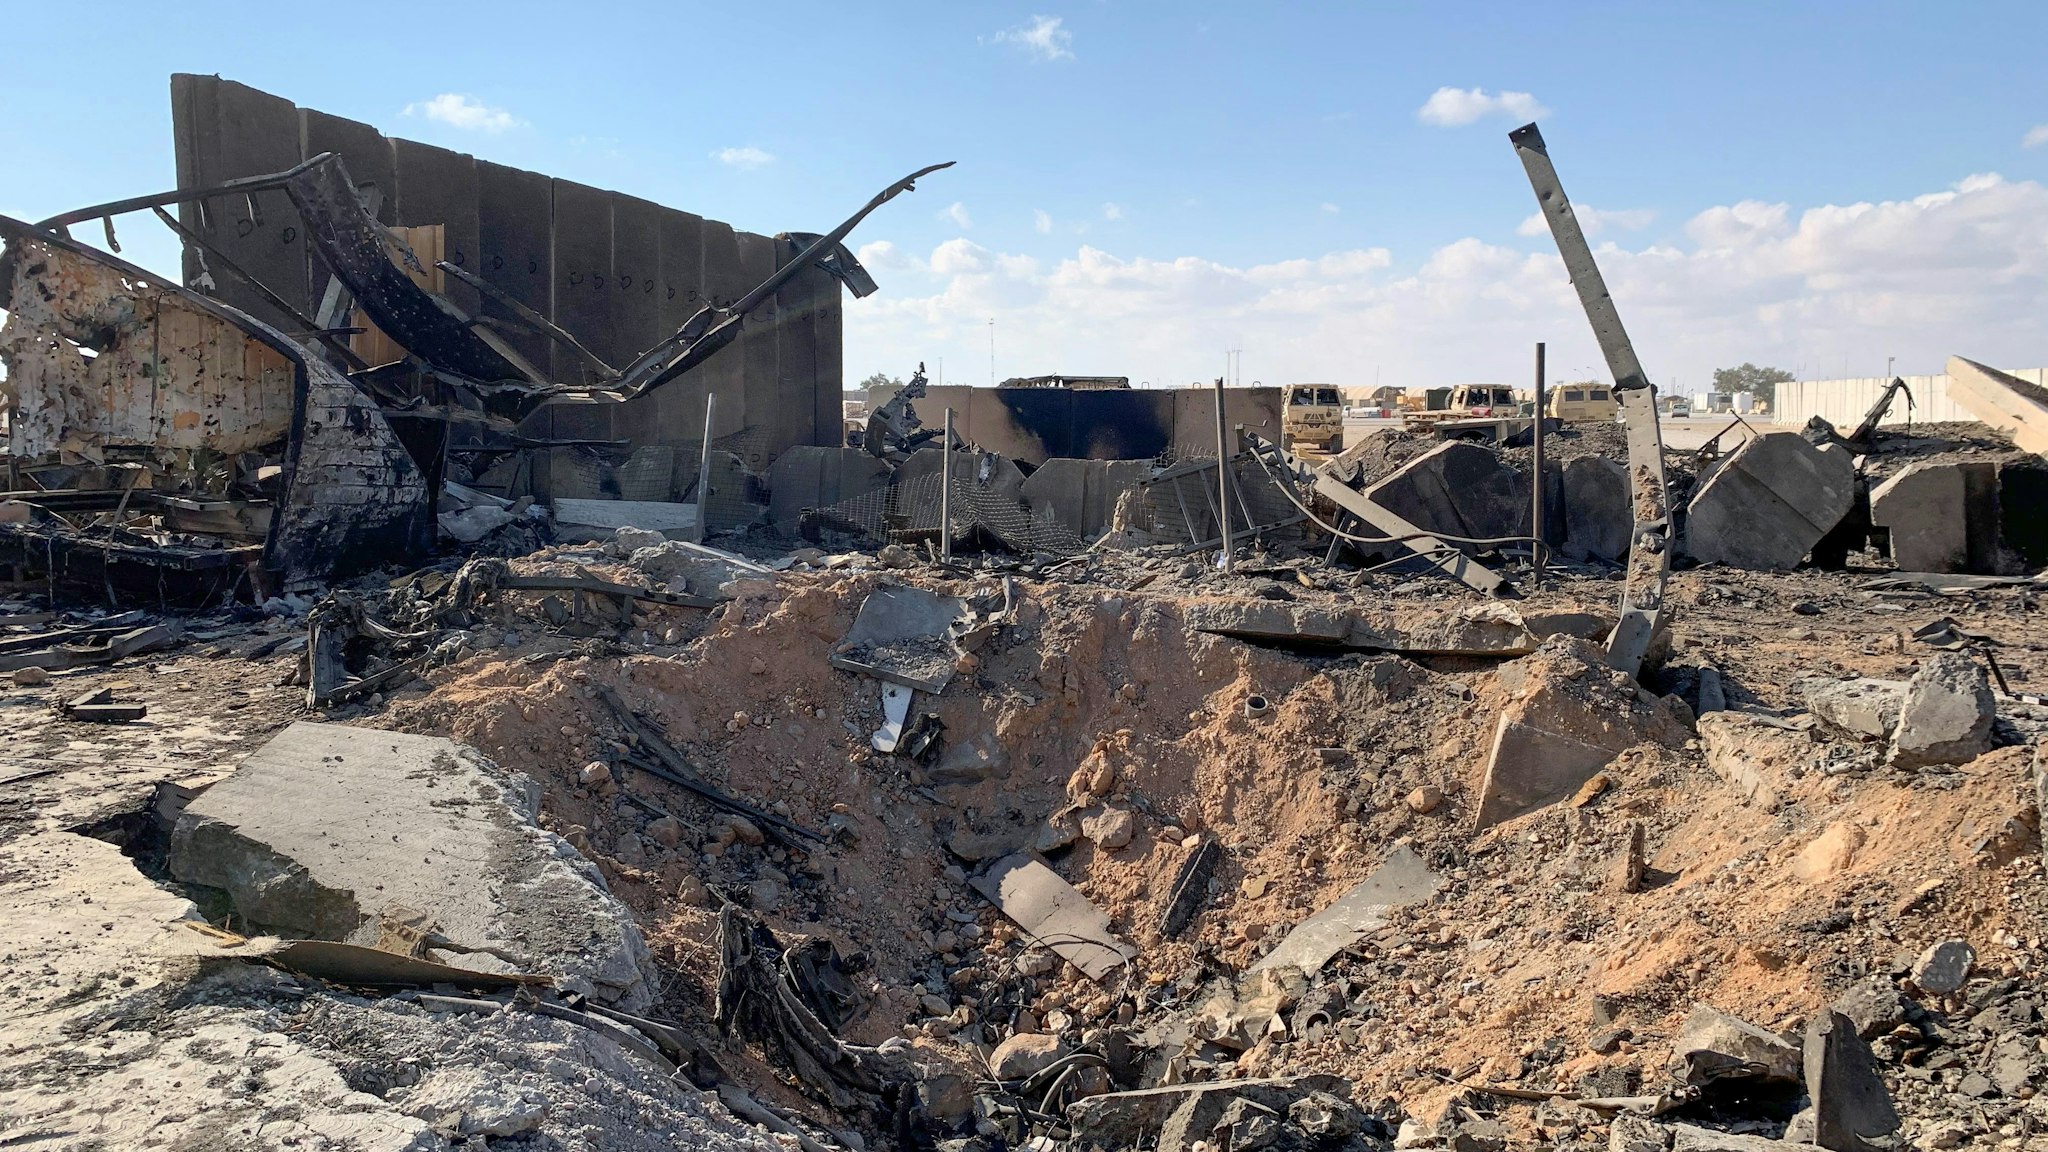 A picture taken on January 13, 2020 during a press tour organised by the US-led coalition fighting the remnants of the Islamic State group, shows a view of the damage at Ain al-Asad military airbase housing US and other foreign troops in the western Iraqi province of Anbar. - Iran last week launched a wave of missiles at the sprawling Ain al-Asad airbase in western Iraq and a base in Arbil, capital of Iraq's autonomous Kurdish region, both hosting US and other foreign troops, in retaliation for the US killing top Iranian general Qasem Soleimani in a drone strike in Baghdad on January 3.